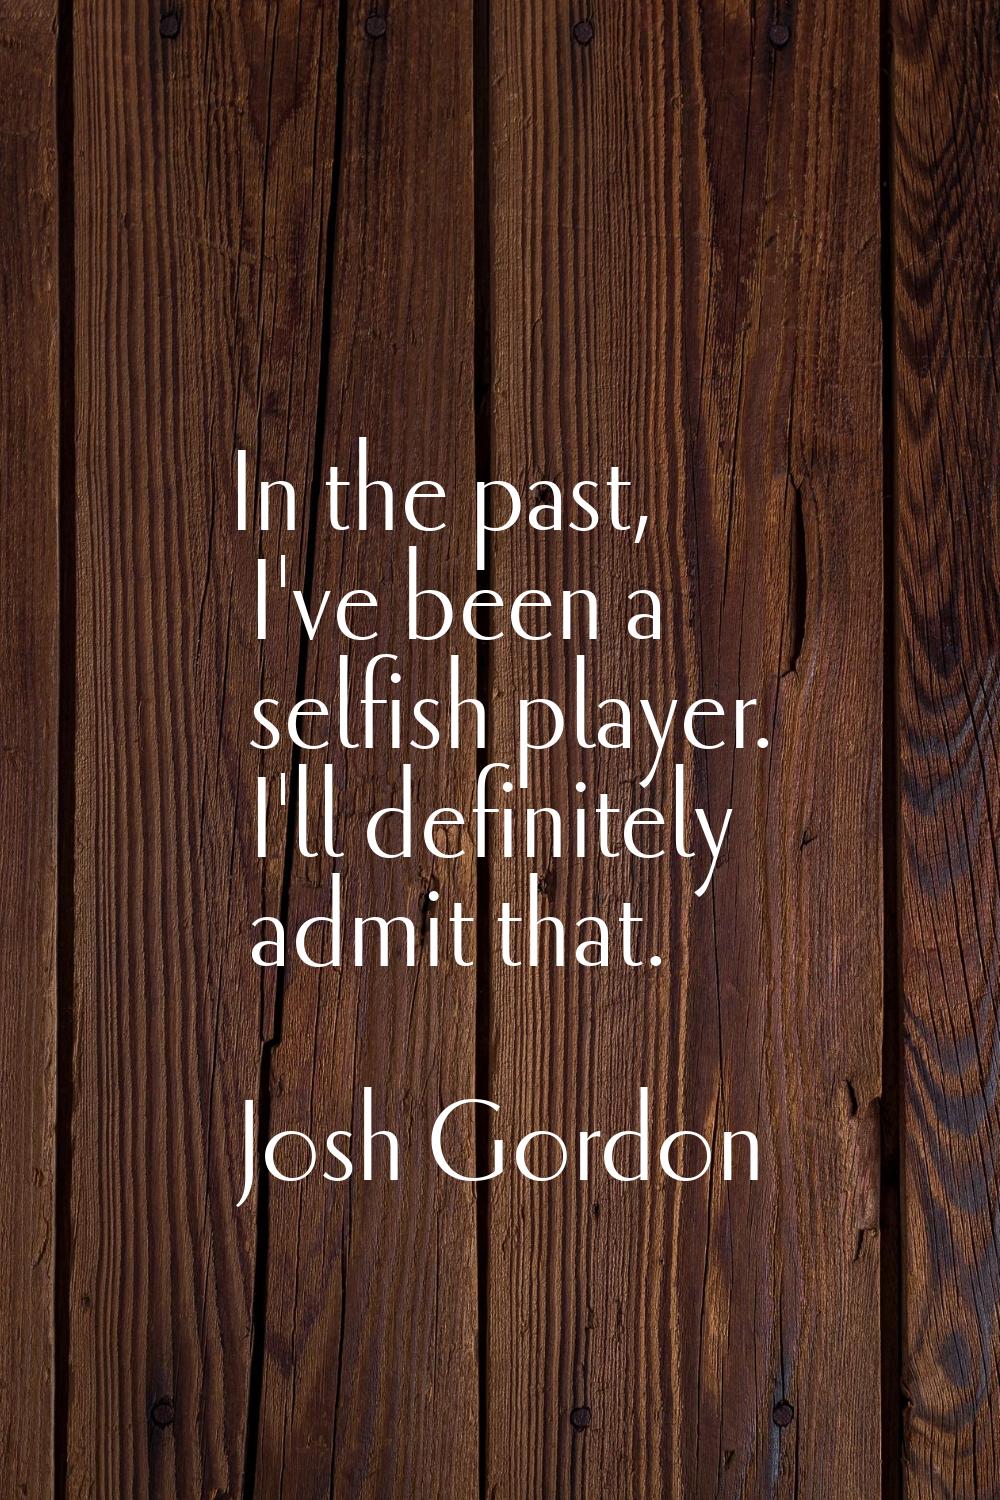 In the past, I've been a selfish player. I'll definitely admit that.